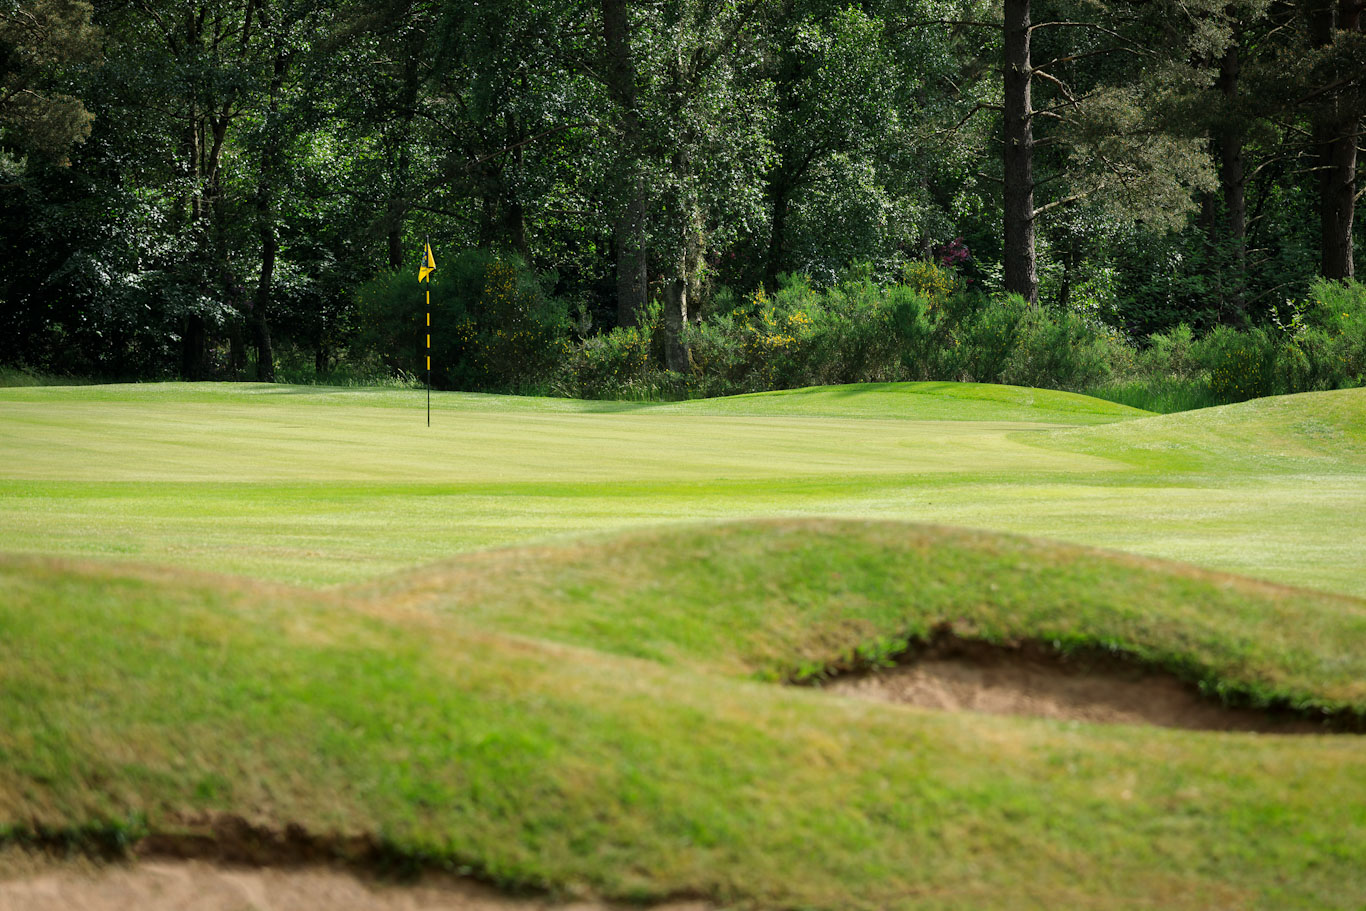 Onto the green at Blairgowrie Golf Club, Perthshire, Scotland